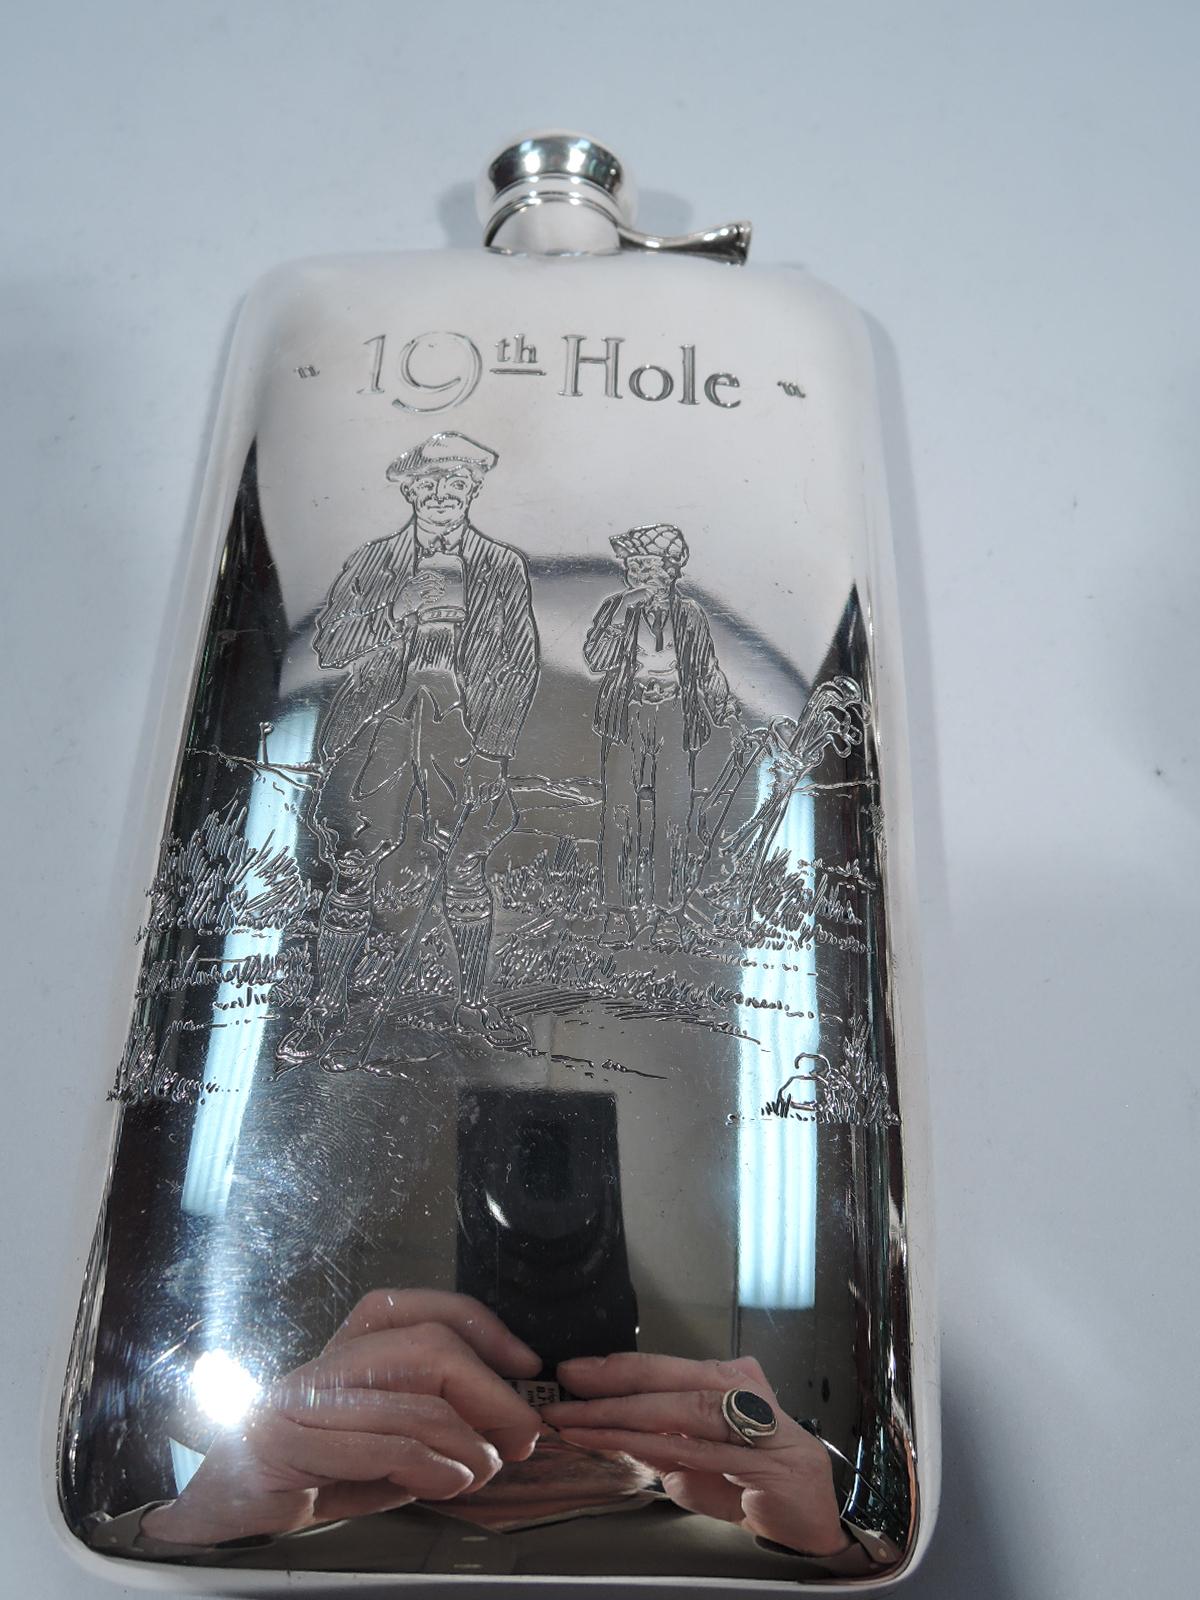 Large Edwardian sterling silver flask with engraved golfing scene. Made by William B. Kerr in Newark, circa 1910. Rectilinear with hinged and cork-lined cover. On front is man in plus-fours and cap holding a golf club in one hand and flask in the